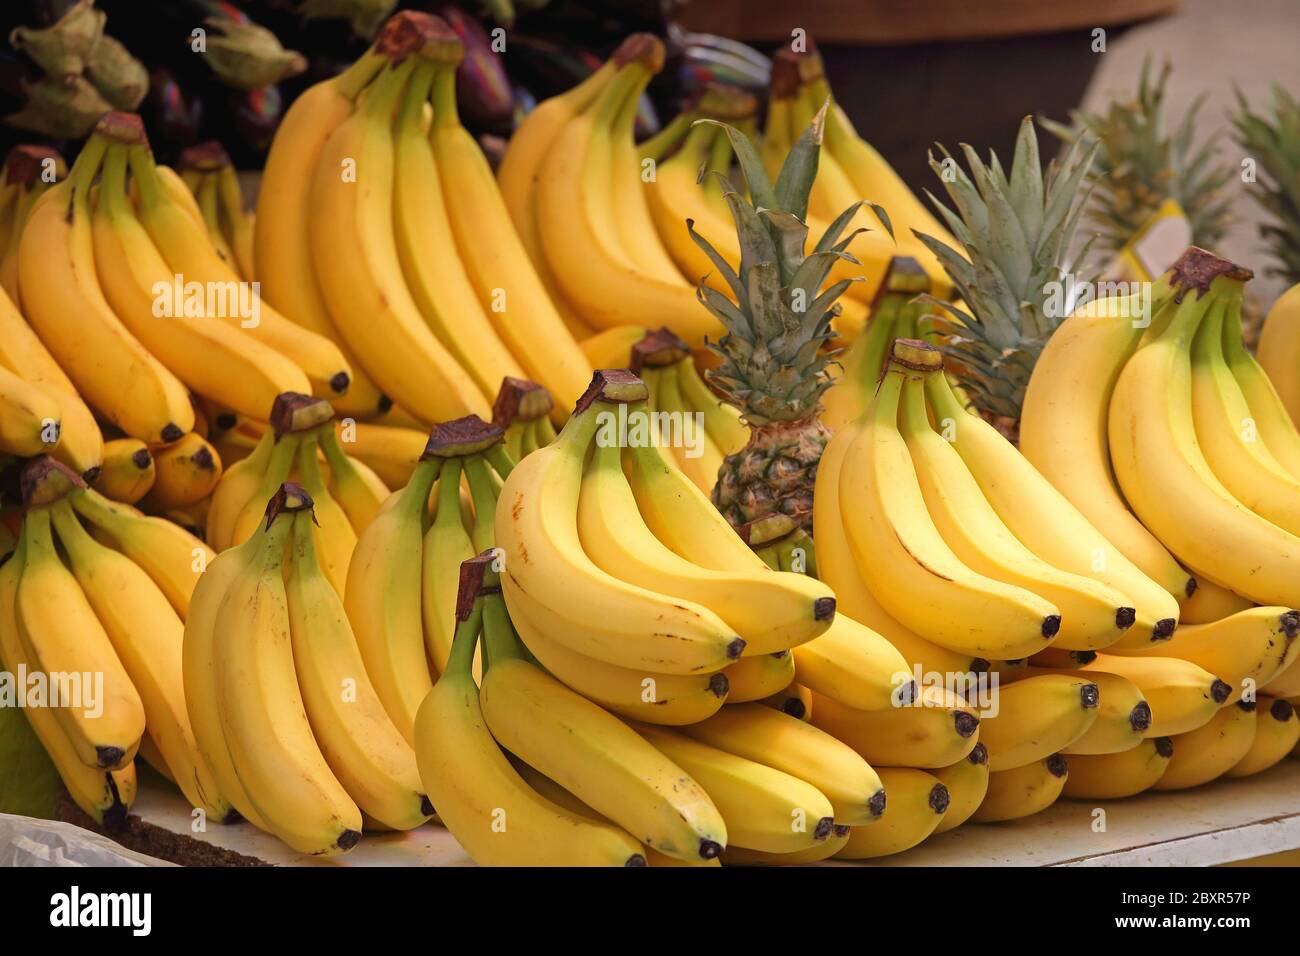 Bunch of Ripe Yellow Bananas at Grocery Store Stock Photo